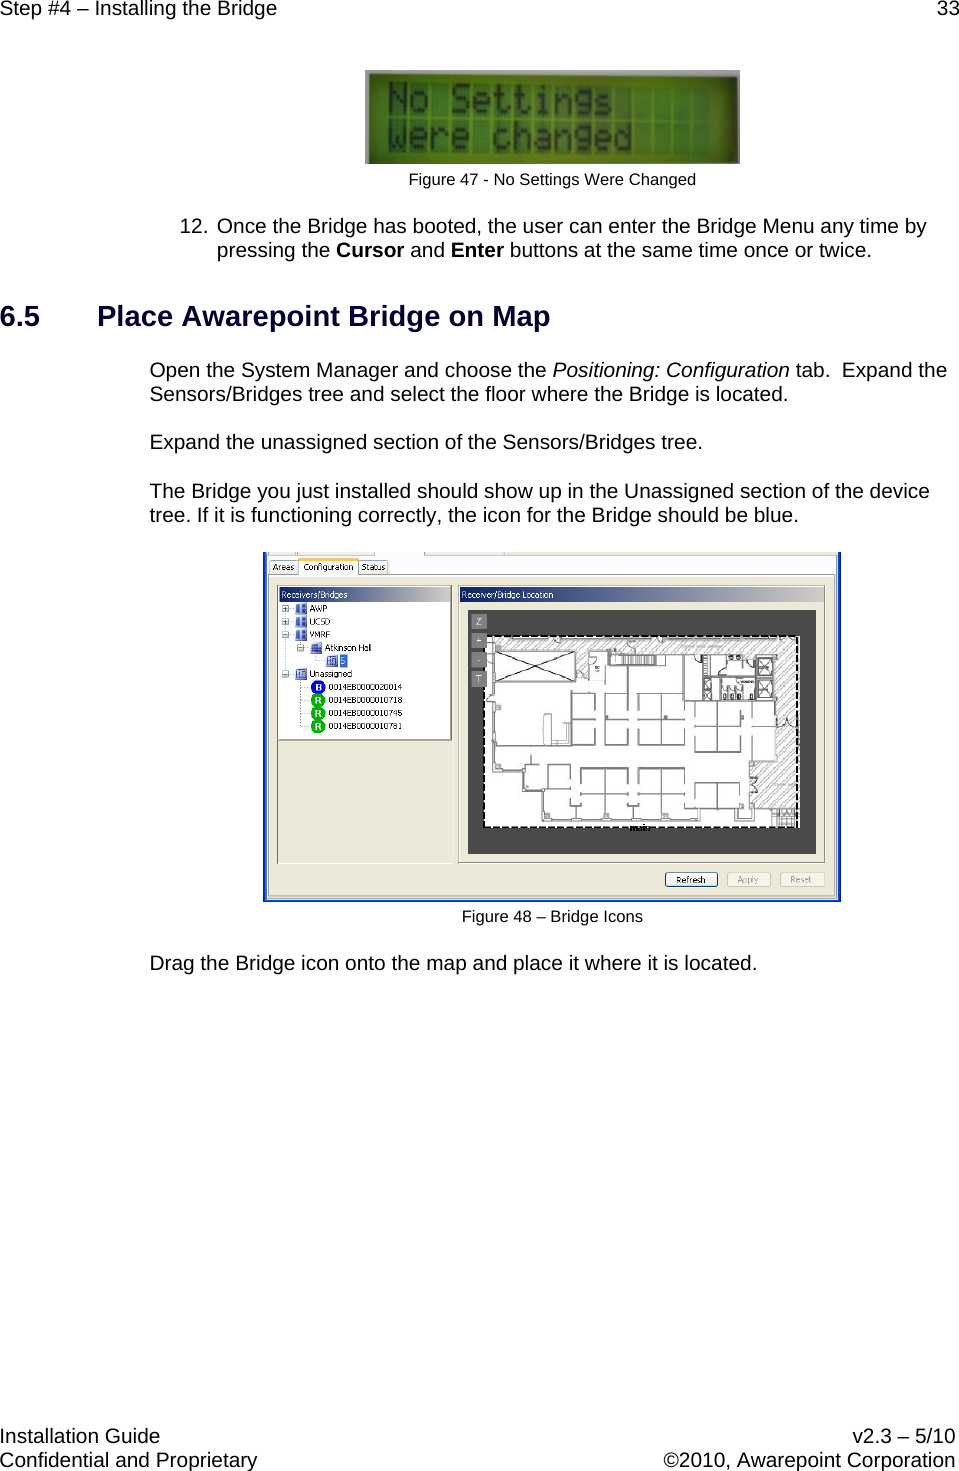 Step #4 – Installing the Bridge    33   Installation Guide    v2.3 – 5/10 Confidential and Proprietary    ©2010, Awarepoint Corporation   Figure 47 - No Settings Were Changed 12. Once the Bridge has booted, the user can enter the Bridge Menu any time by pressing the Cursor and Enter buttons at the same time once or twice.   6.5 Place Awarepoint Bridge on Map Open the System Manager and choose the Positioning: Configuration tab.  Expand the Sensors/Bridges tree and select the floor where the Bridge is located.  Expand the unassigned section of the Sensors/Bridges tree.  The Bridge you just installed should show up in the Unassigned section of the device tree. If it is functioning correctly, the icon for the Bridge should be blue.  Figure 48 – Bridge Icons Drag the Bridge icon onto the map and place it where it is located.  